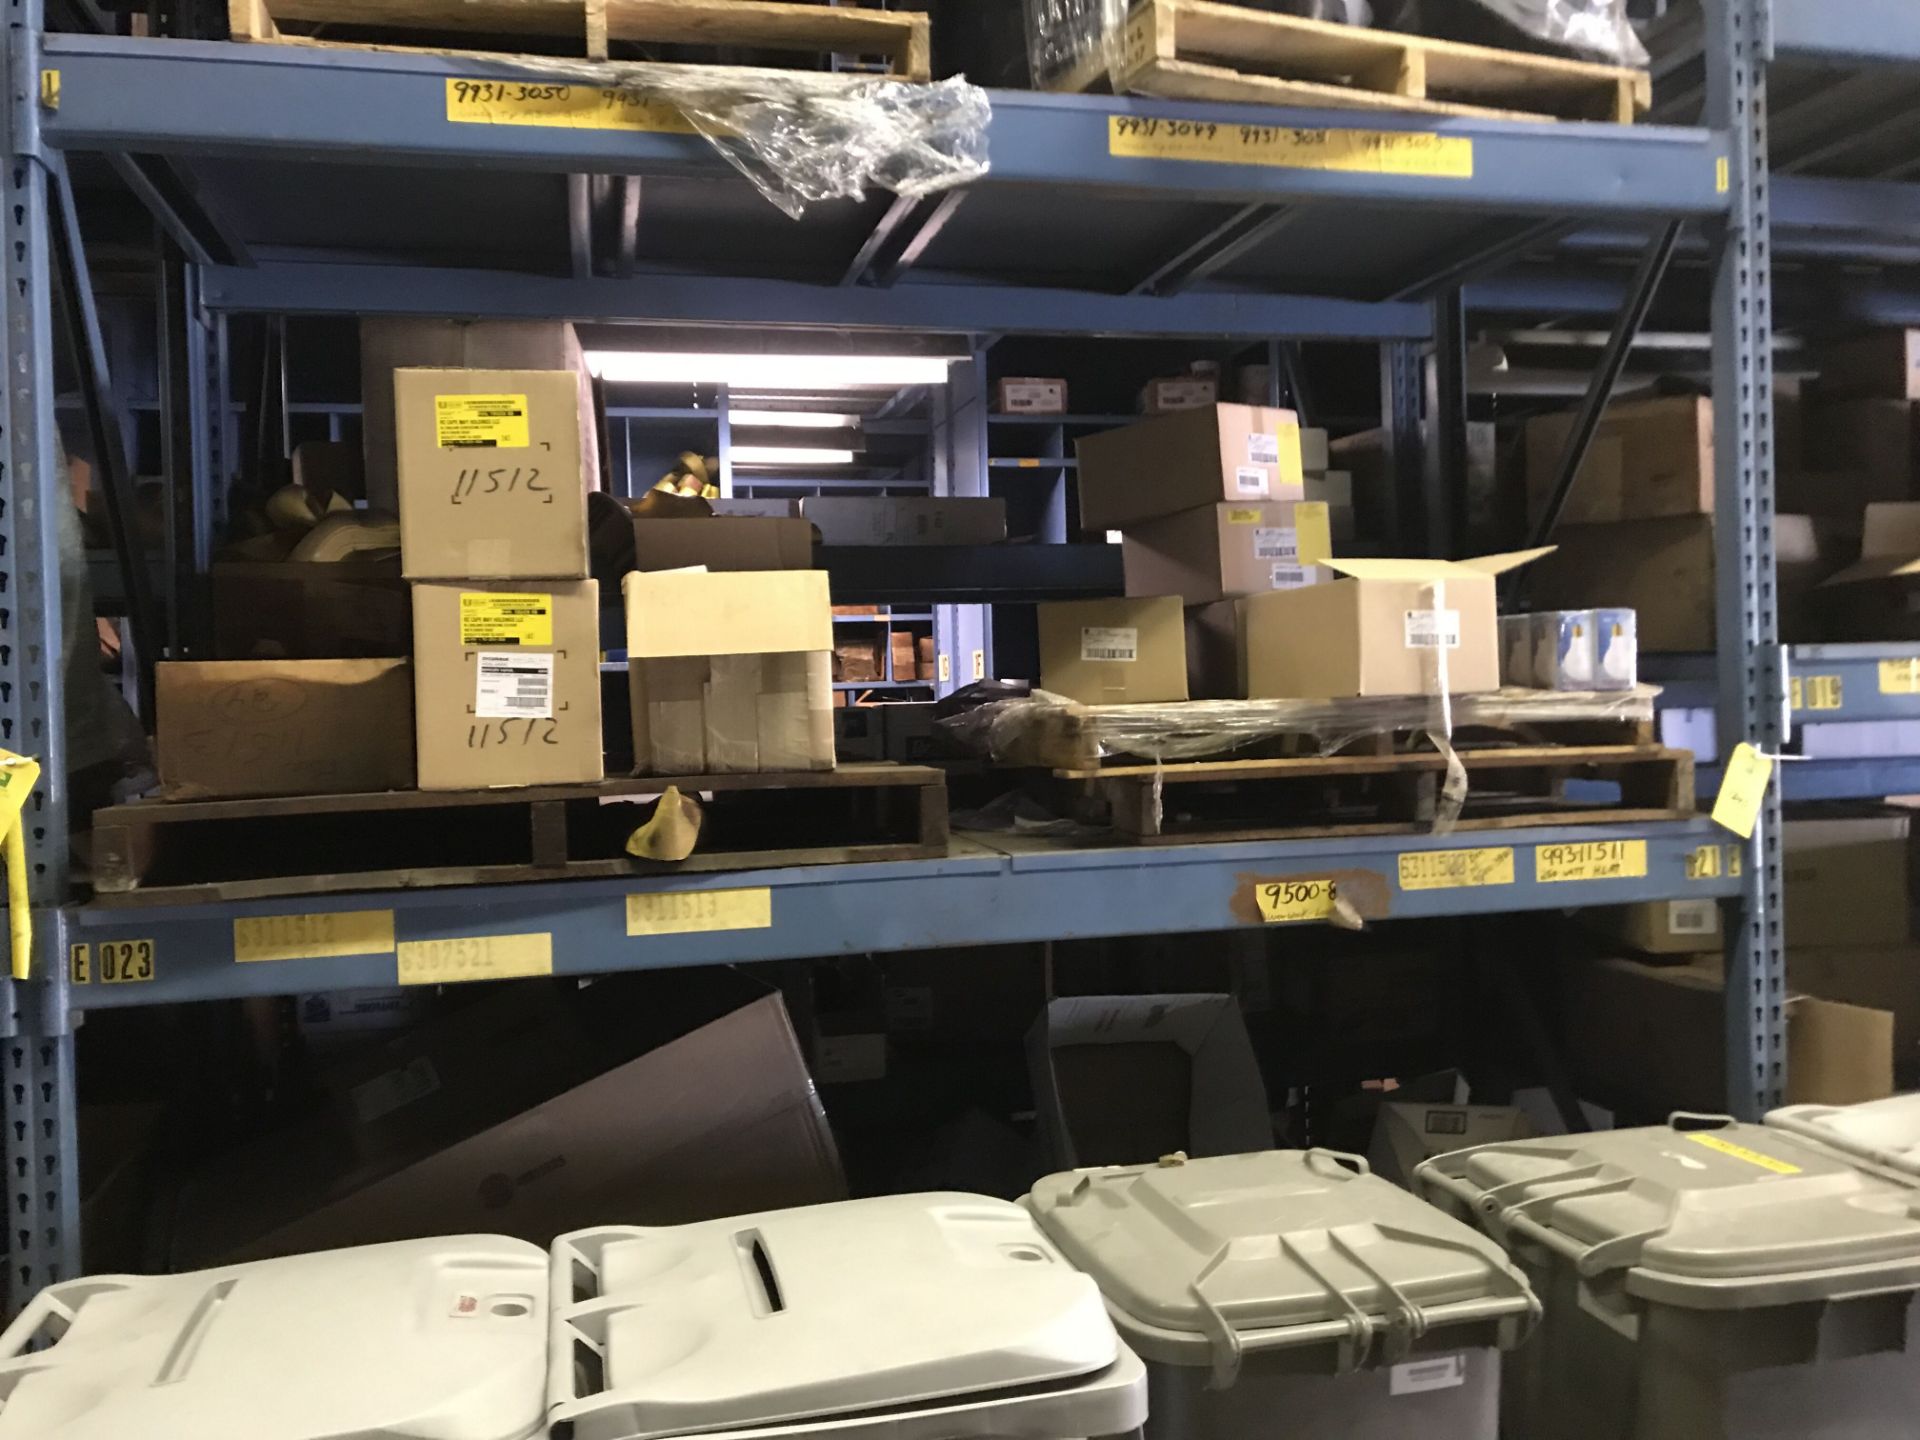 All Contents On Pallet Racking: Light Bulbs (AD)